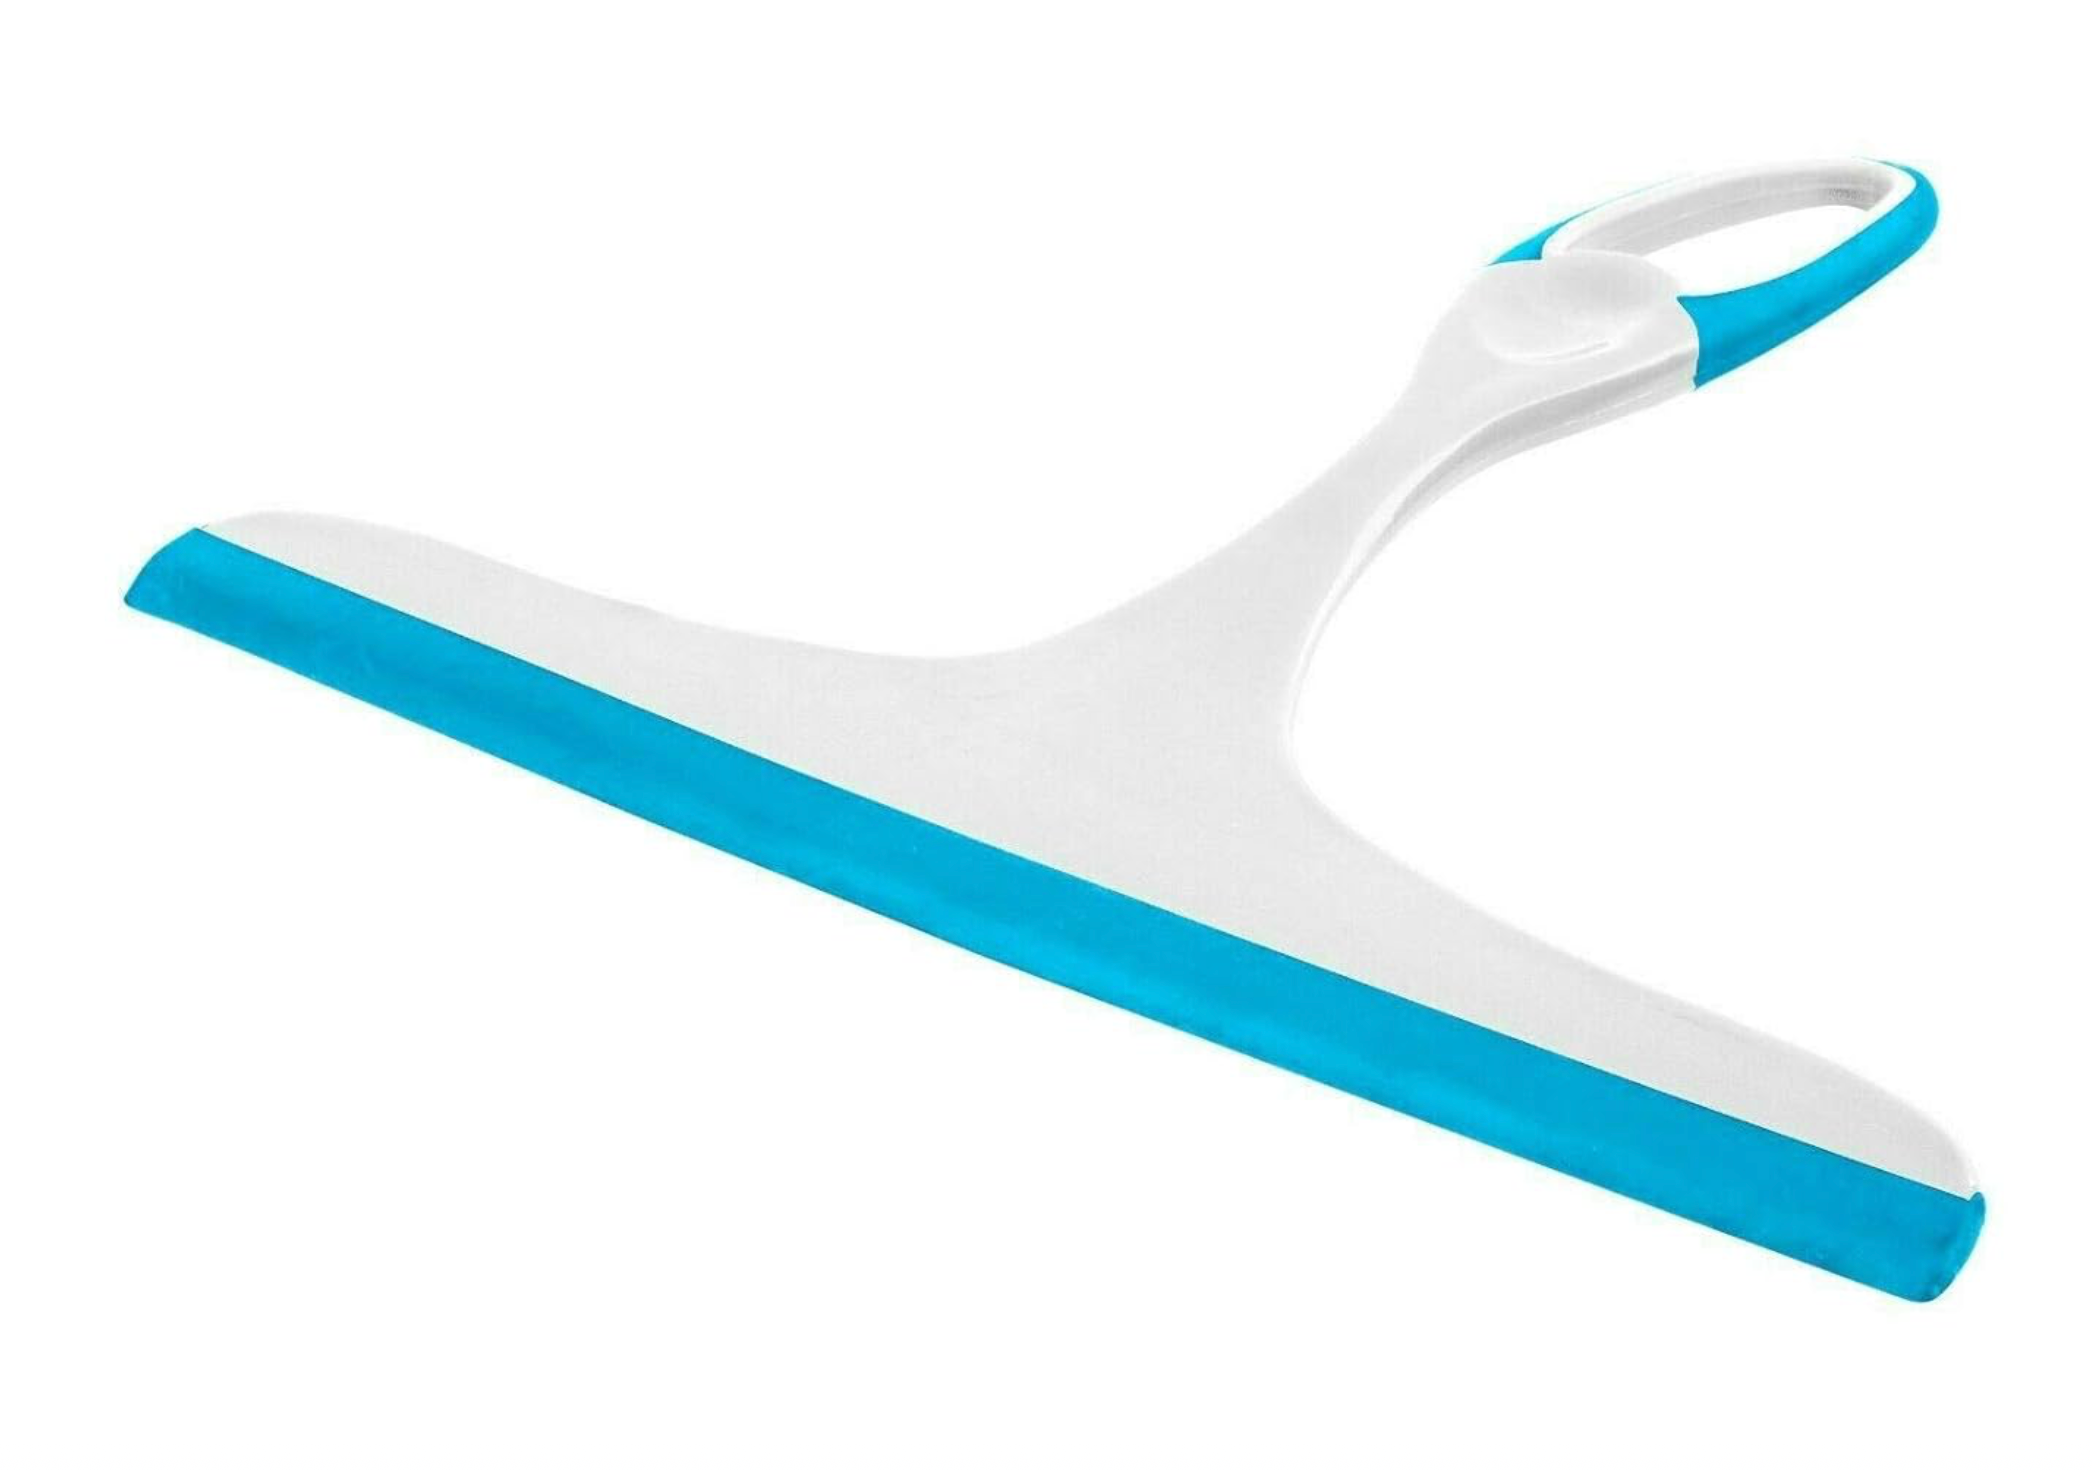 Pro Kleen Shower Squeegee - Blue and white